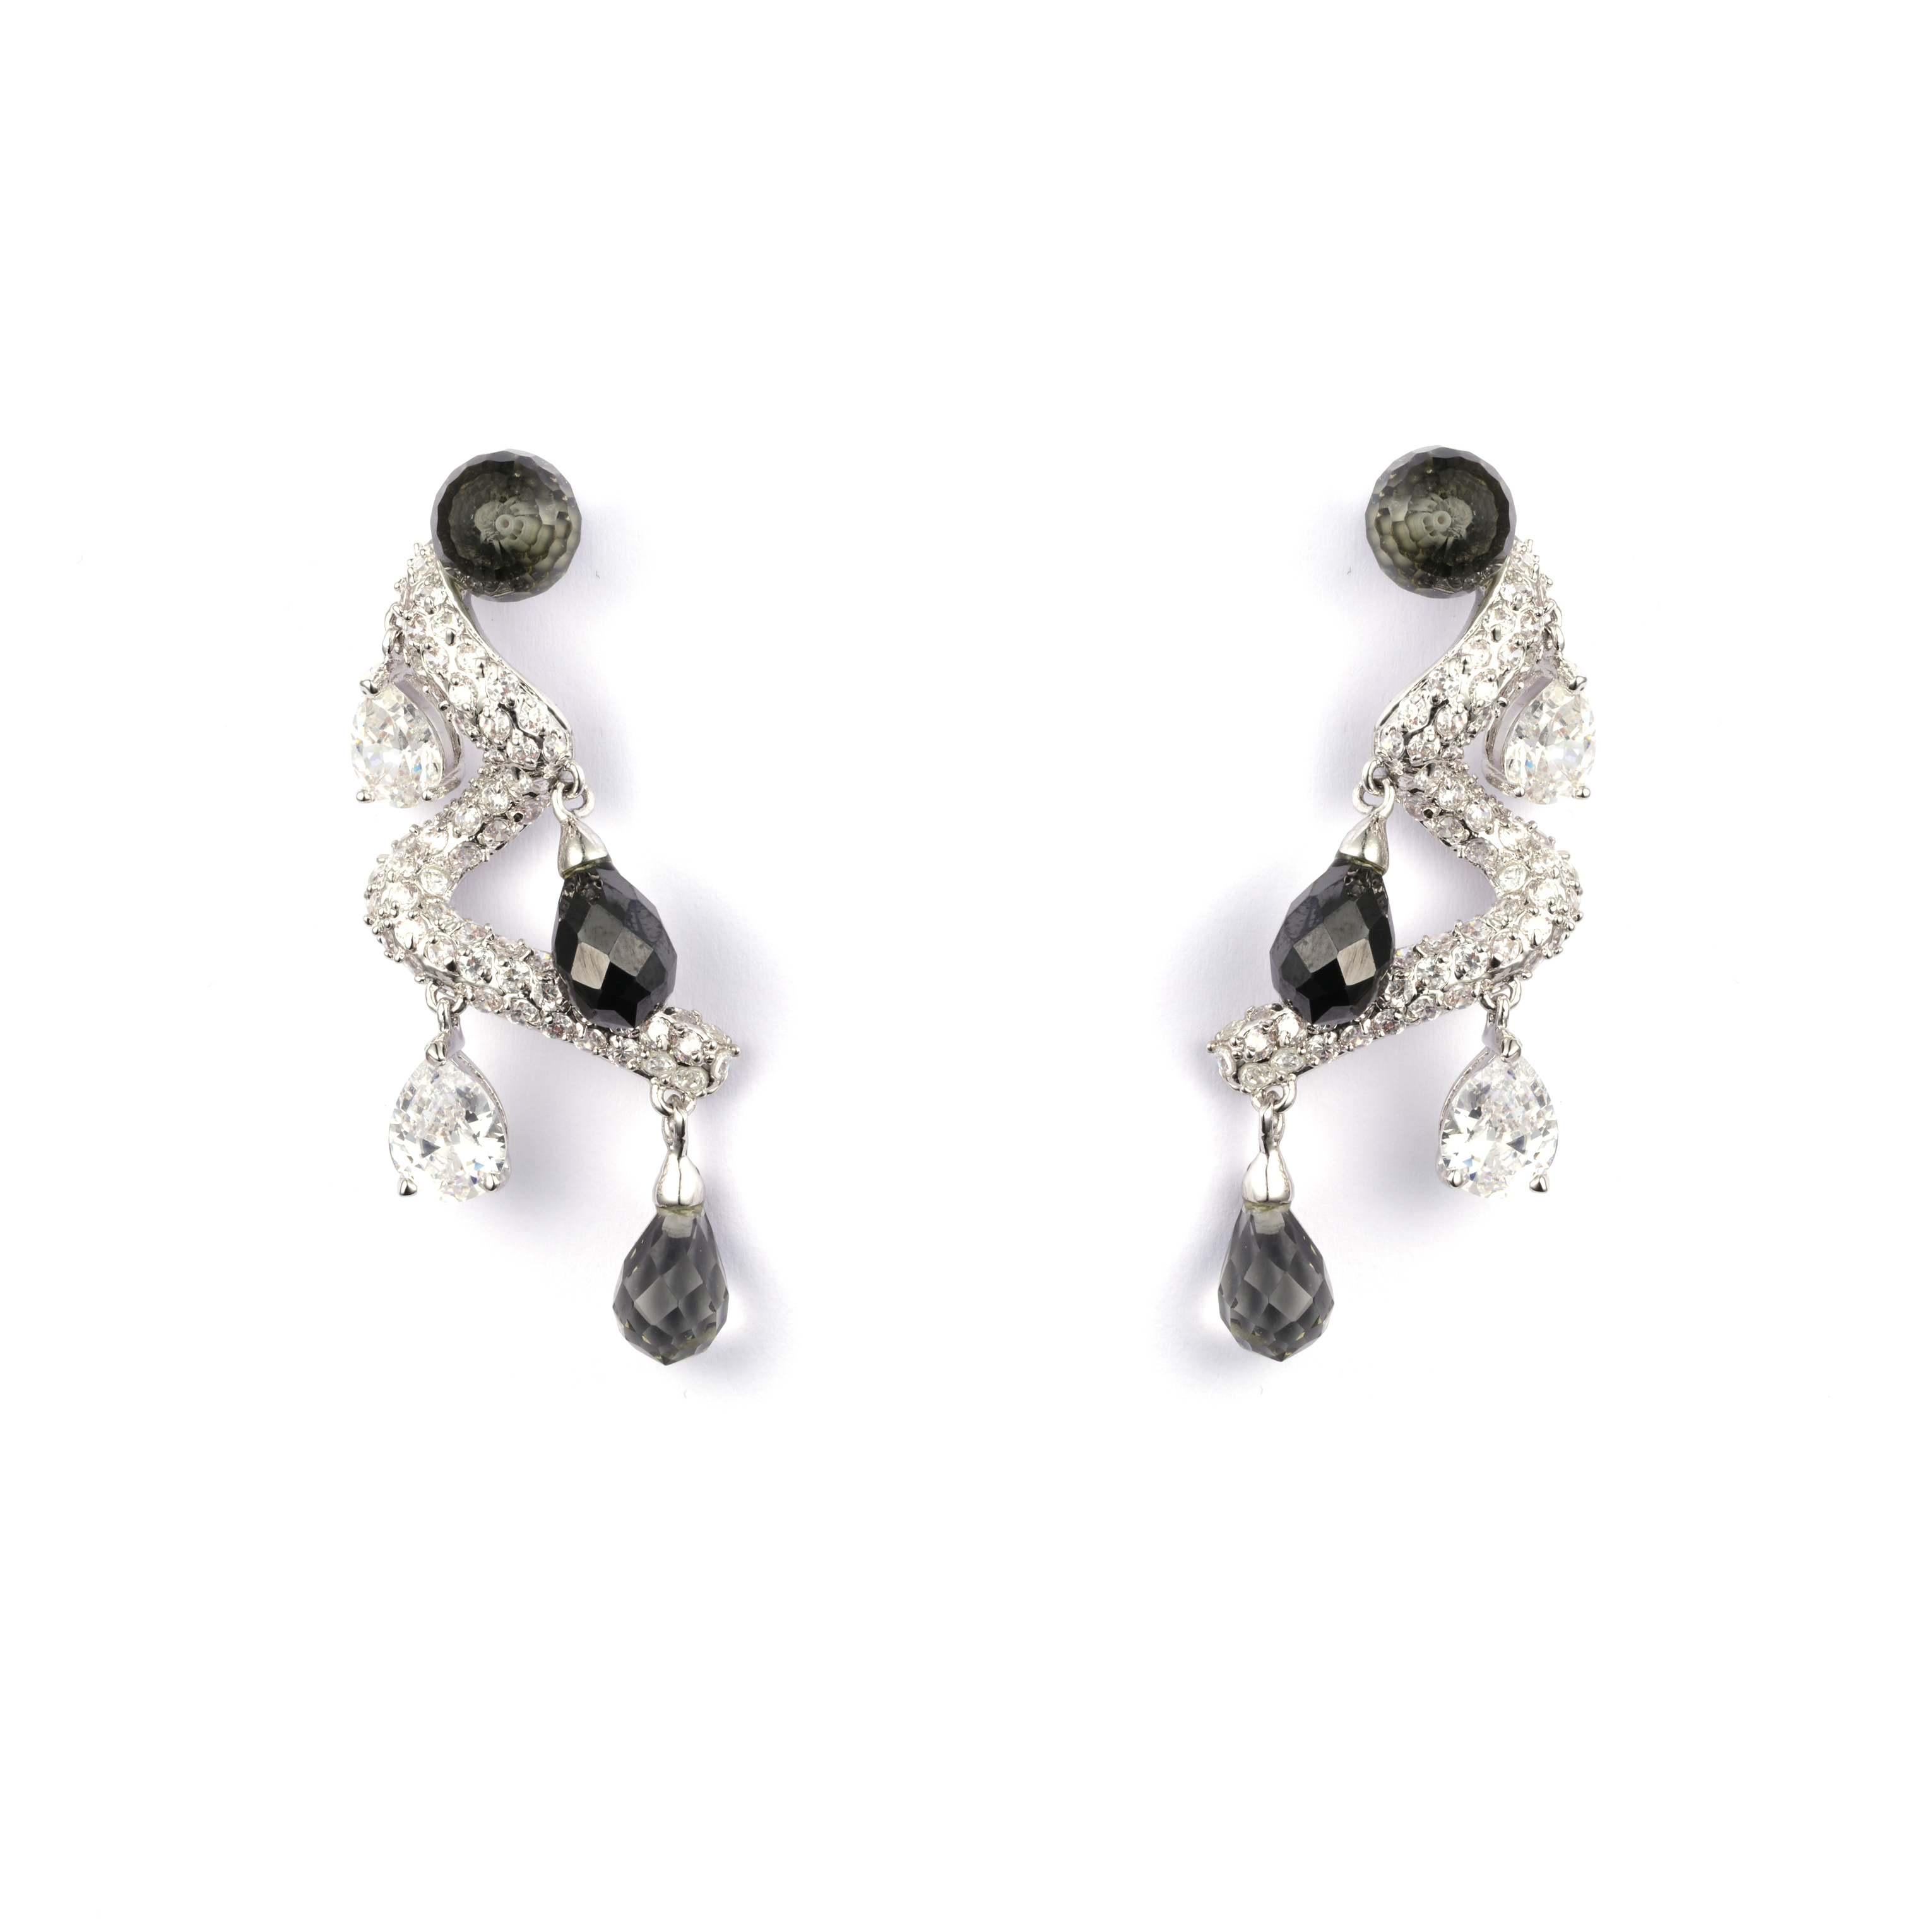 High Quality Crystal Mixes Cz Rhodium Plated Earrings 